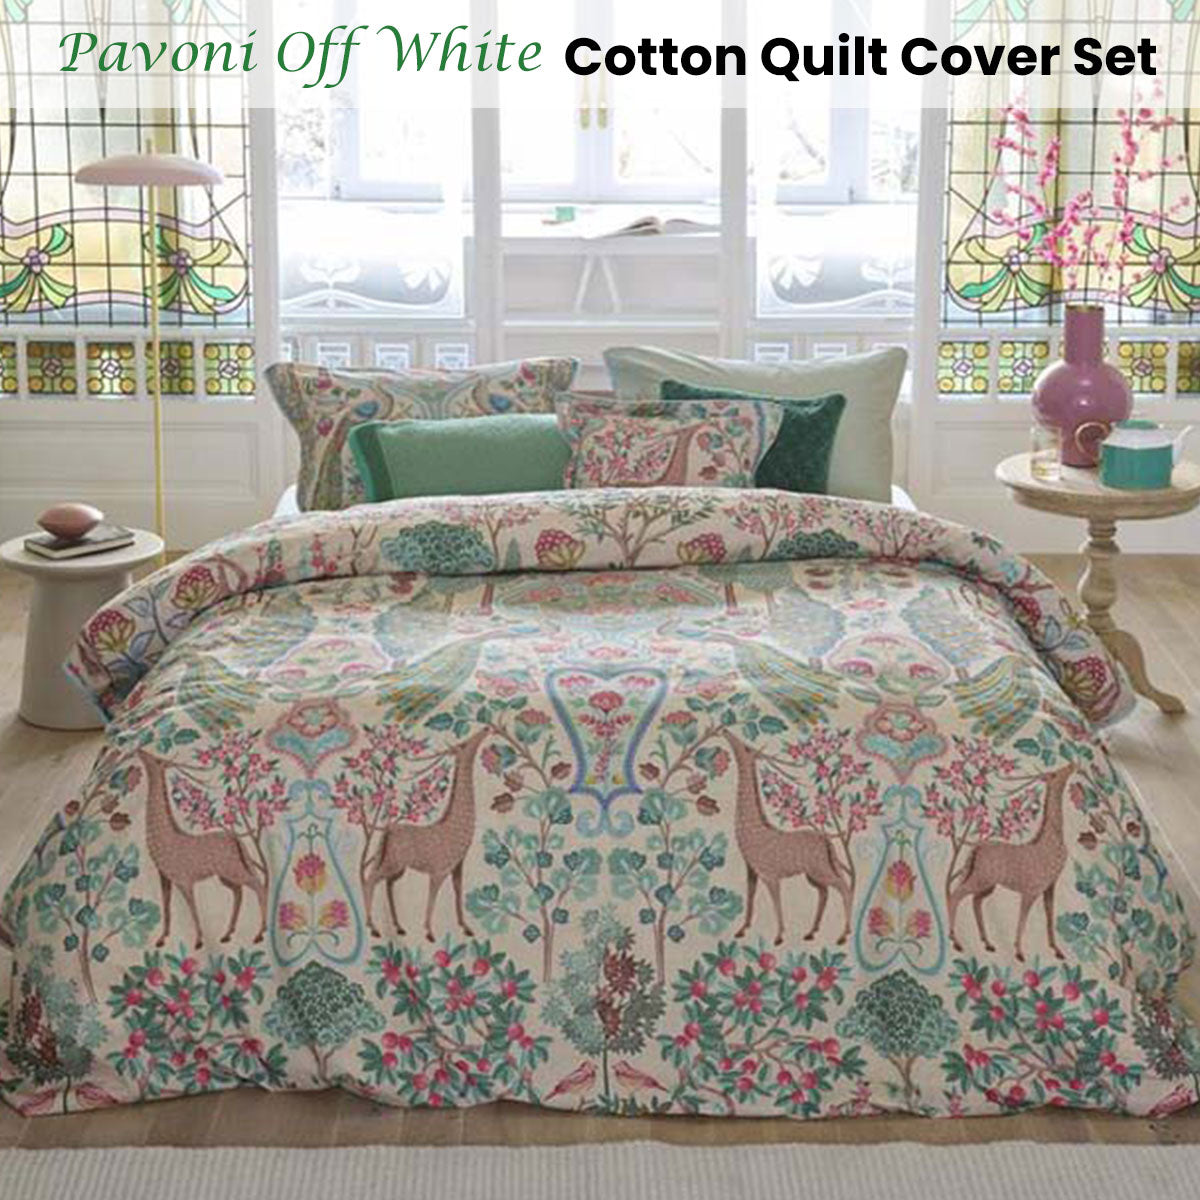 Pavoni Off White Cotton Quilt Cover Set King